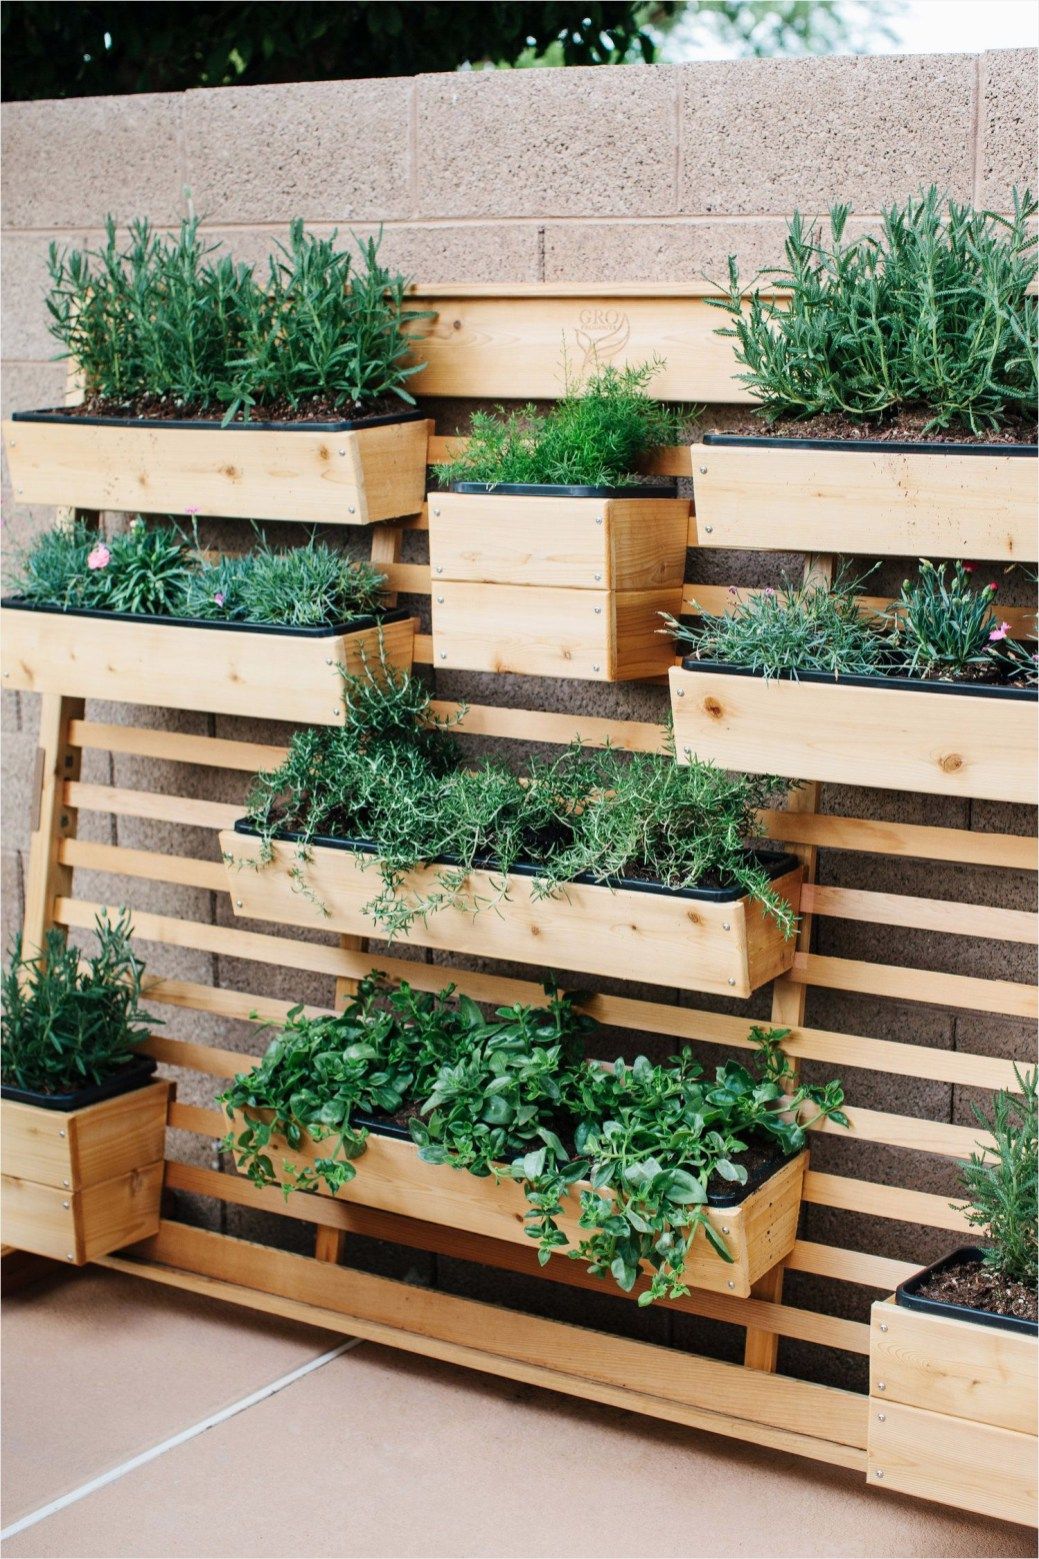 Use Boxes for Plants